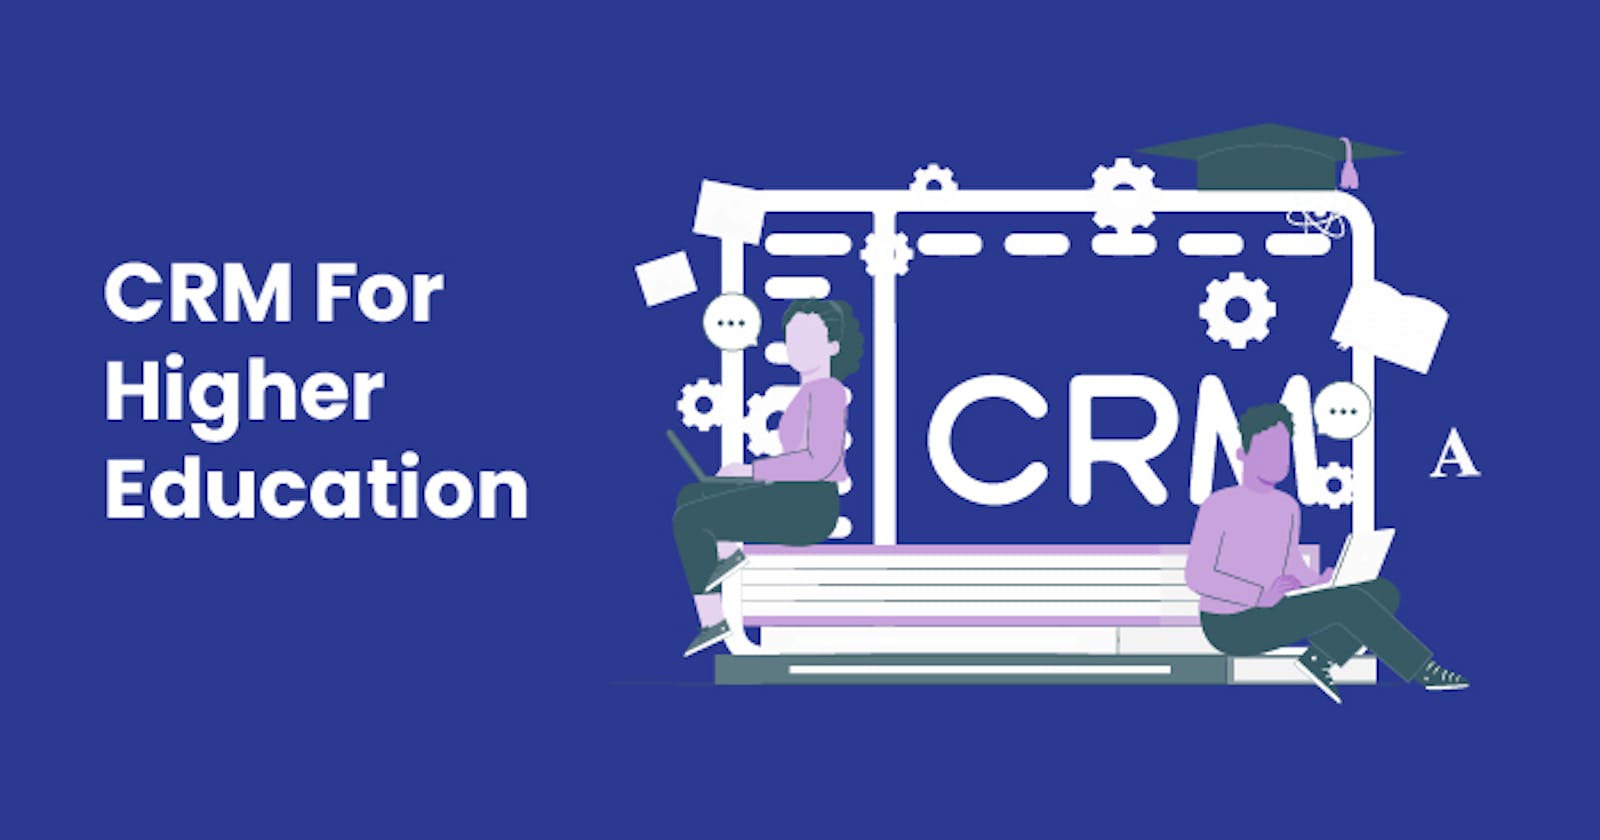 What is the importance of CRM For Higher Education?